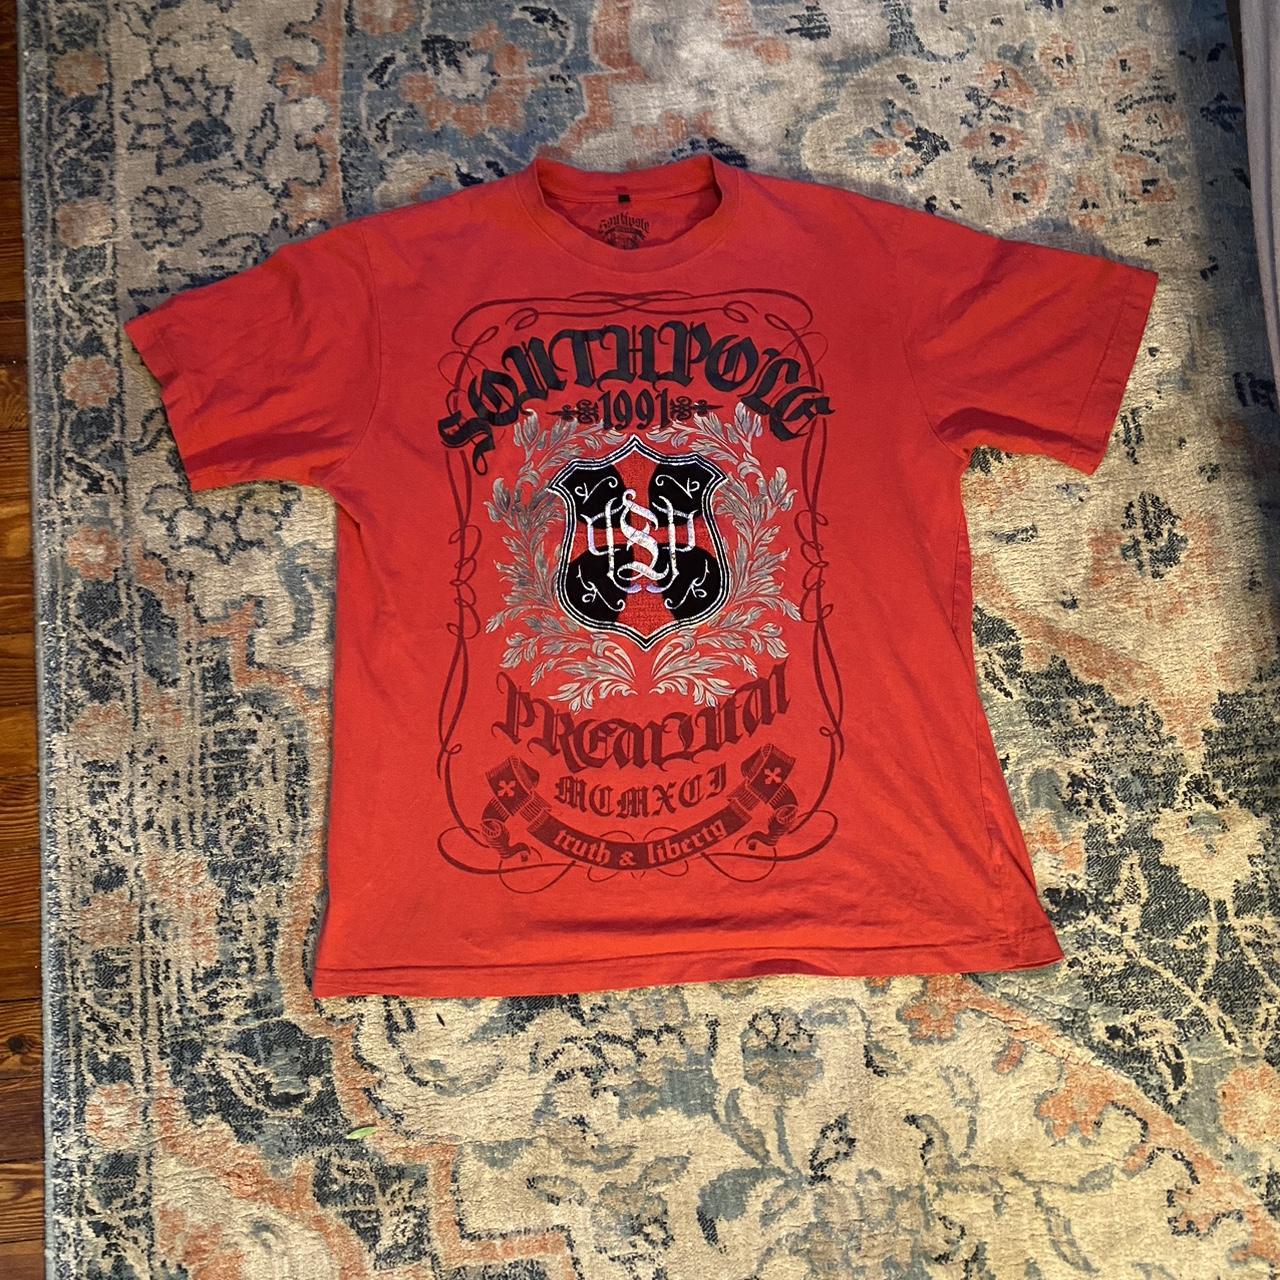 Southpole Men's Red and Black T-shirt | Depop